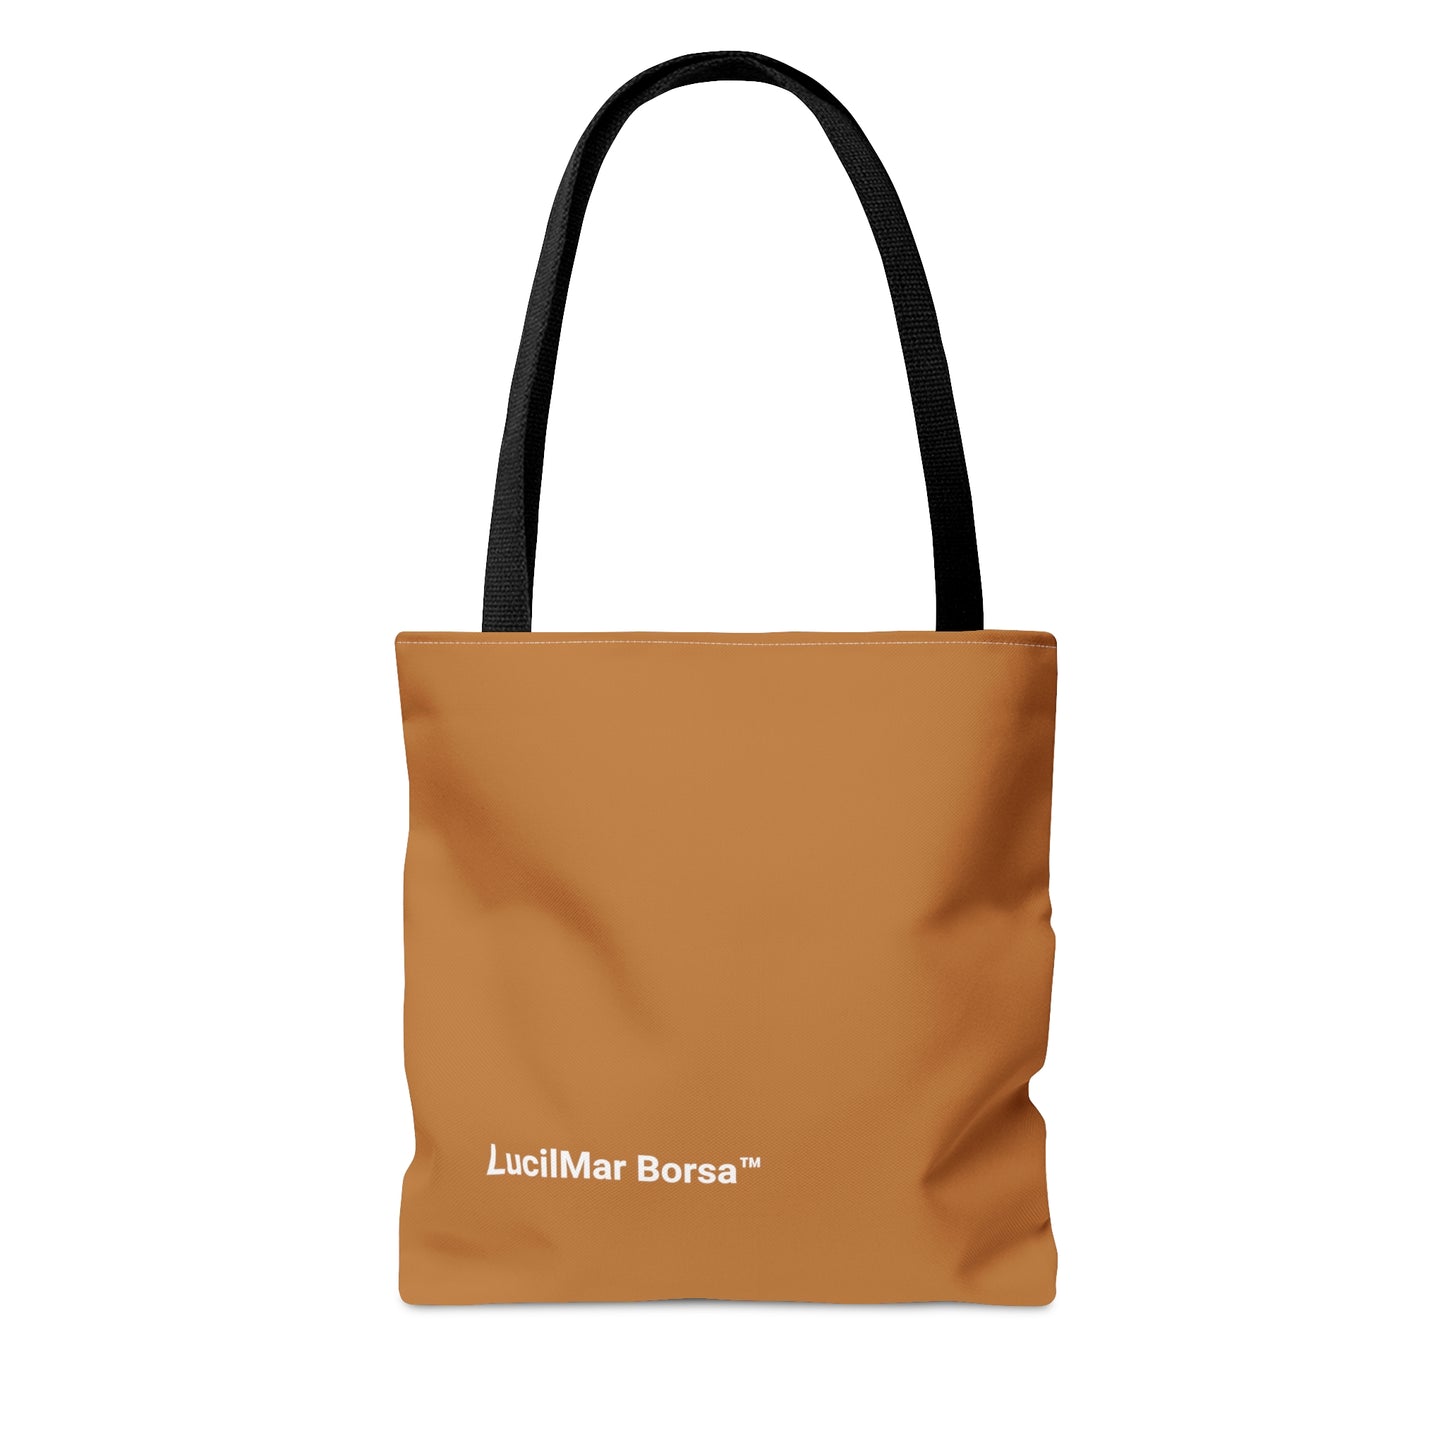 Give Thanks Collection Tote Bag